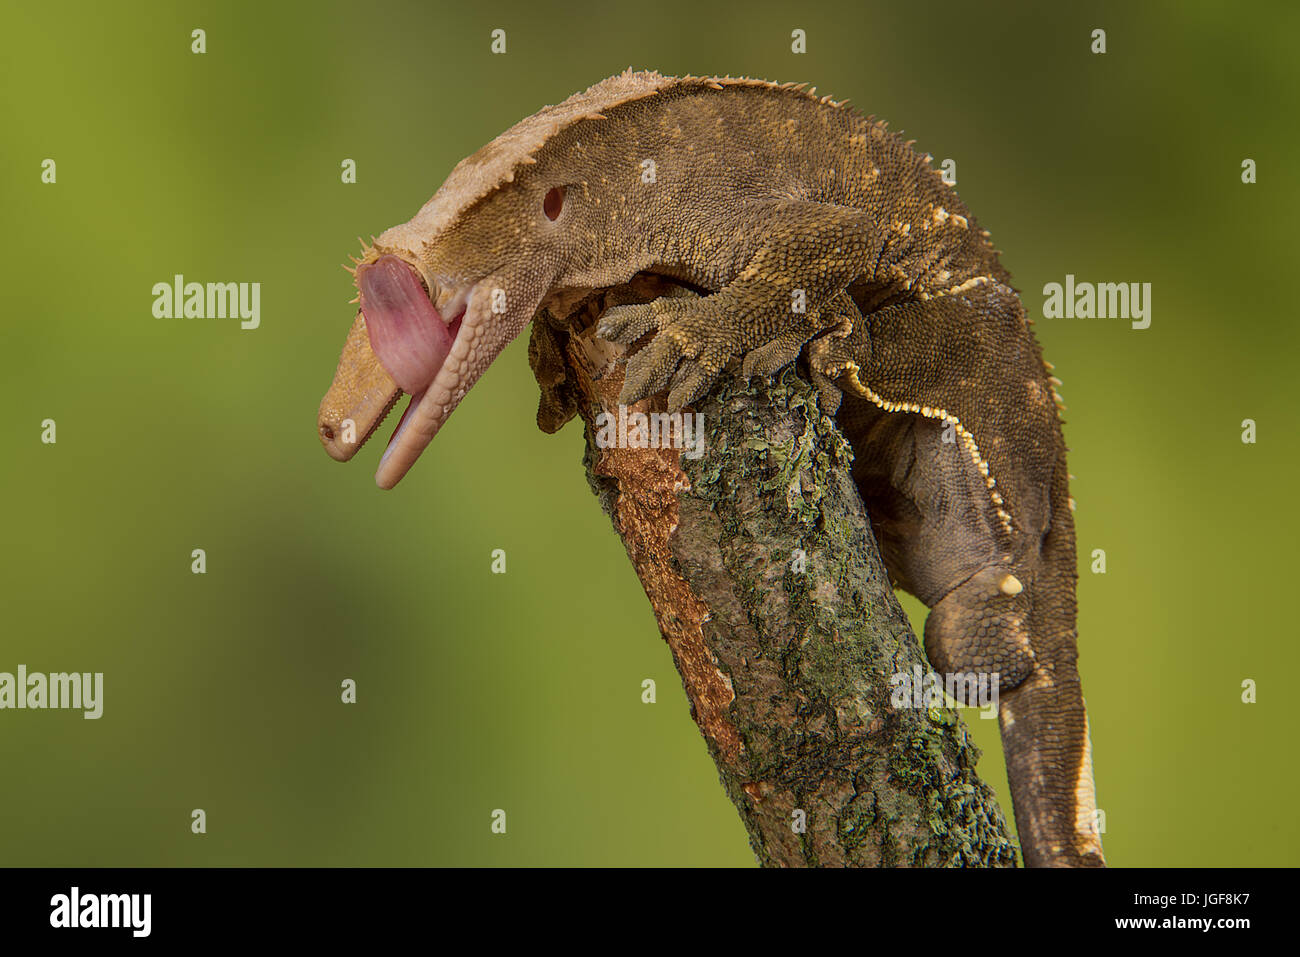 Most geckos unable to blink, this photograph shows one perced on the top of a branch licking its eye to clean it and keep it moist Stock Photo